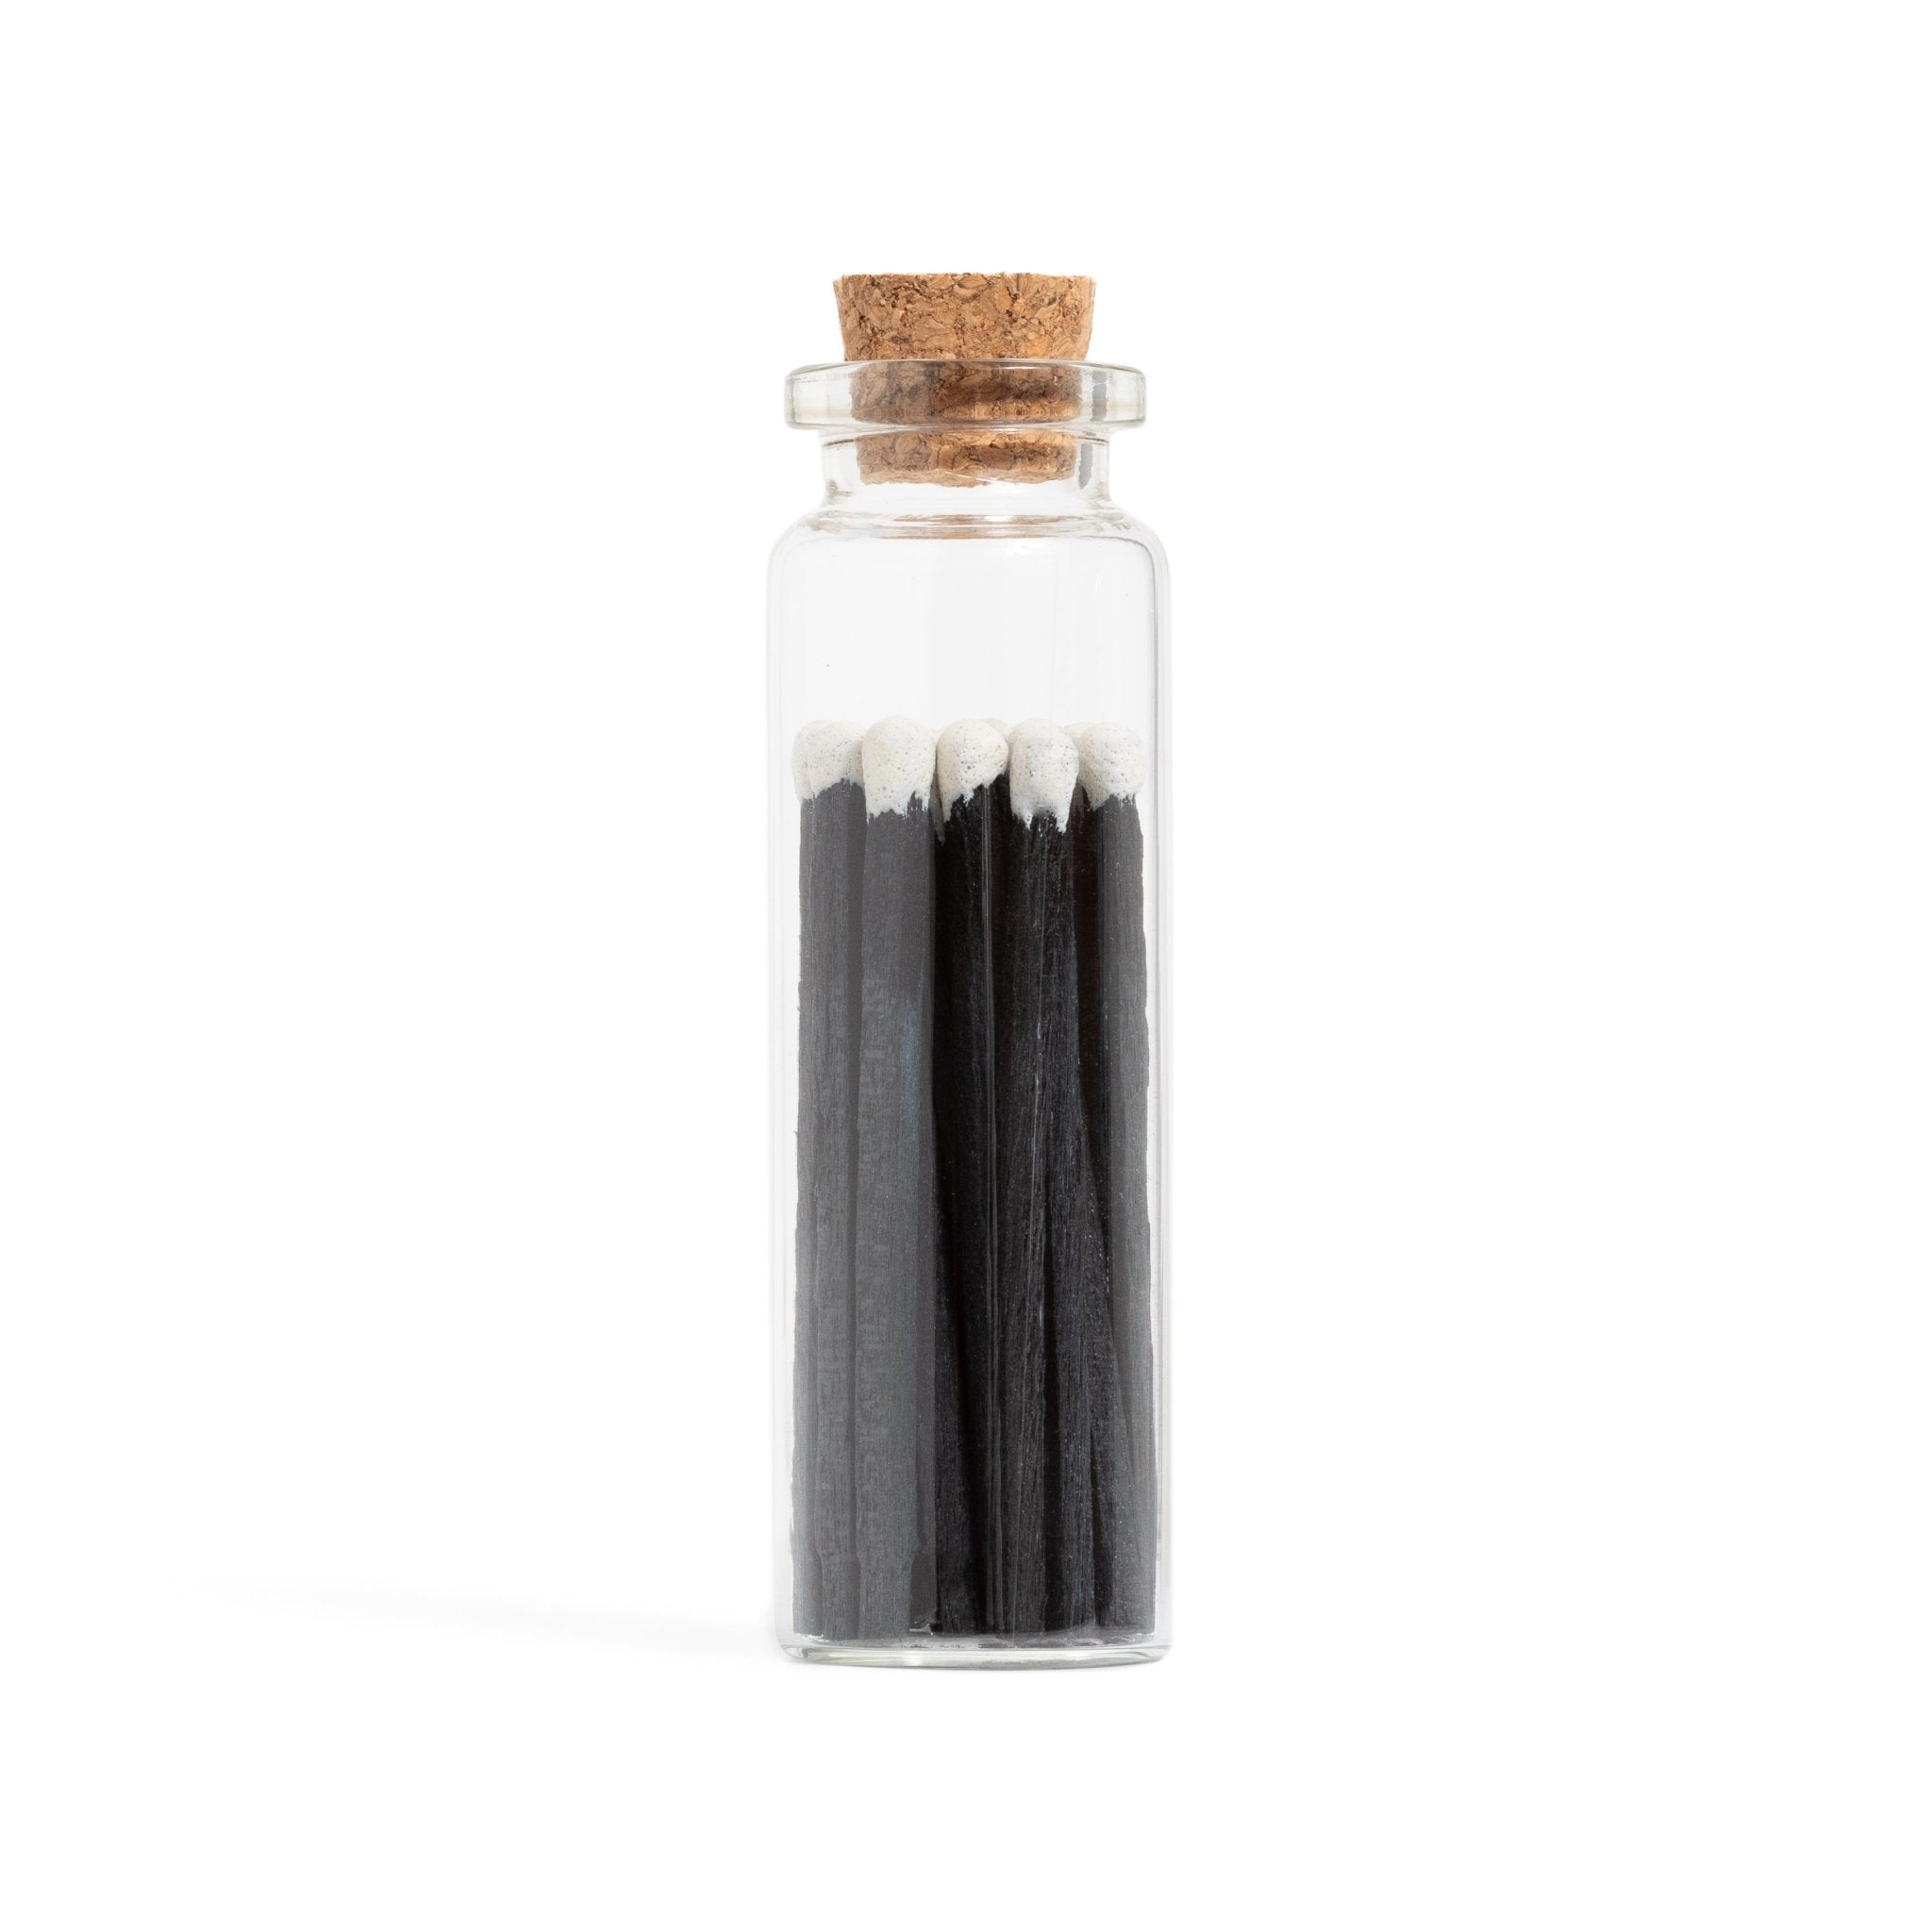 Wood Matches in Corked Vial – Enlighten the Occasion